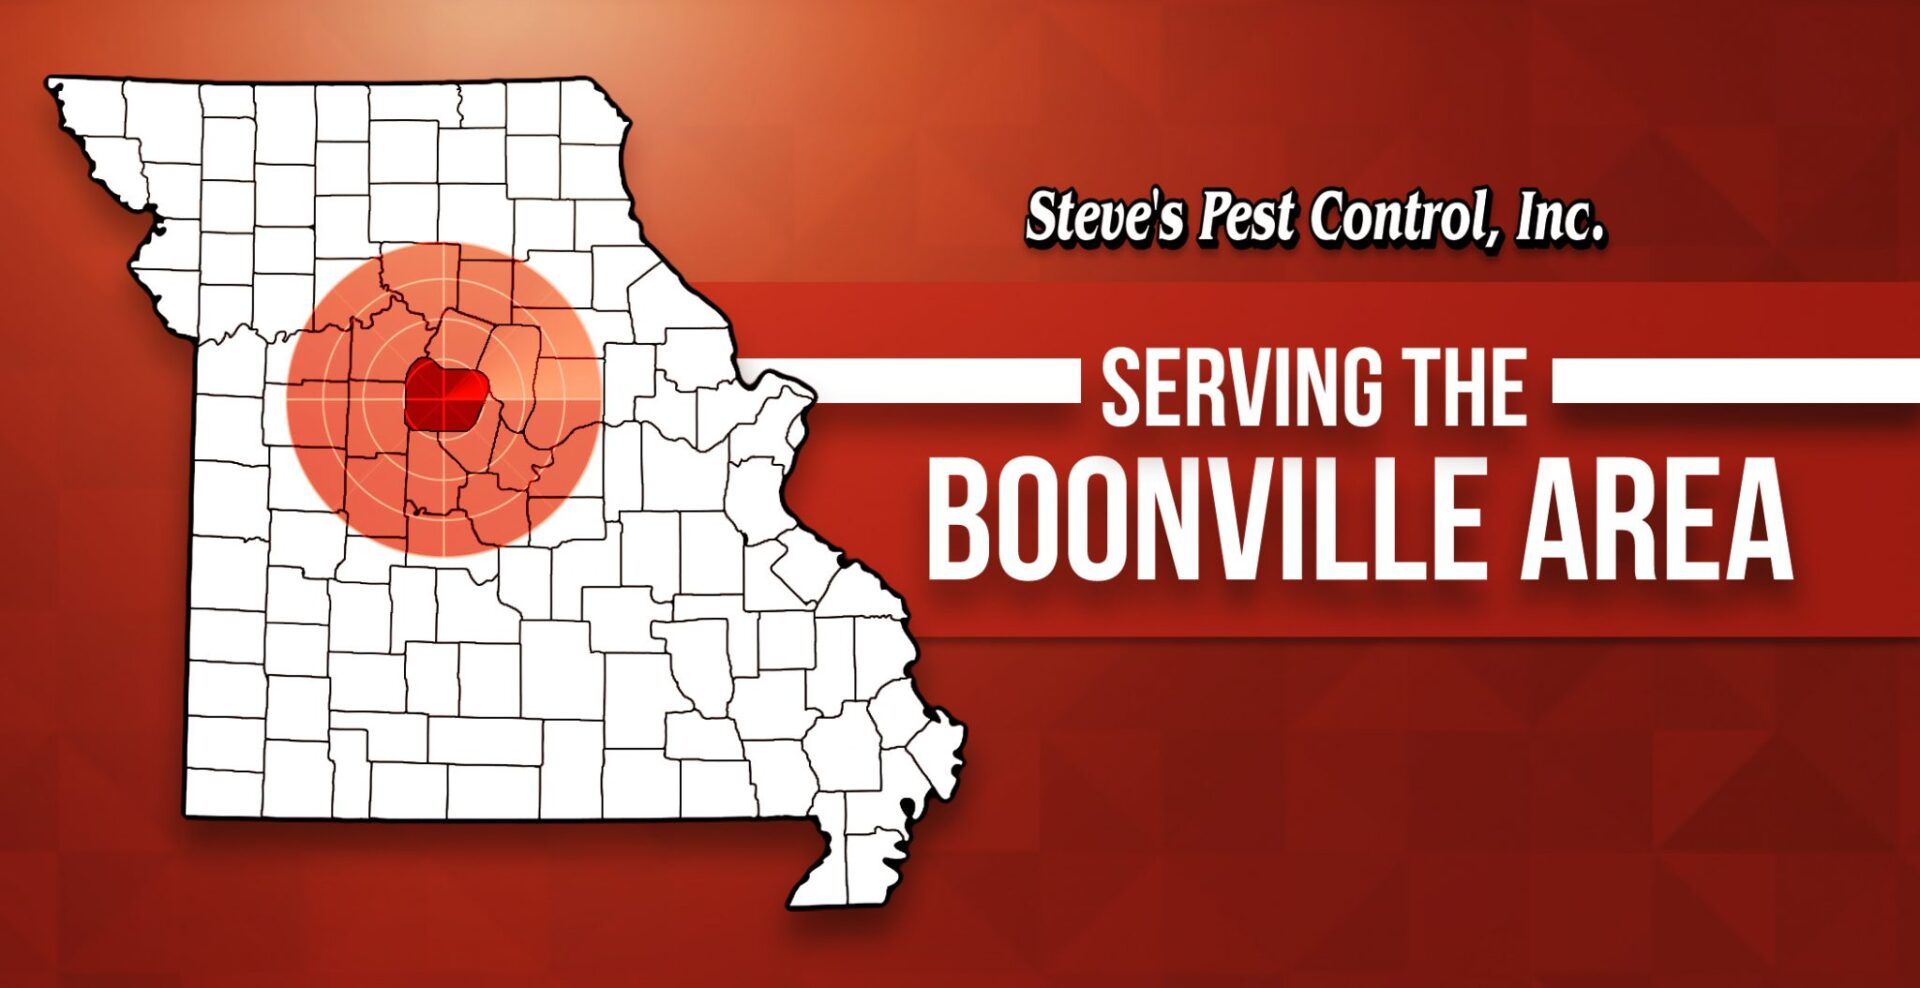 Steve's Pest Control Serves the Boonville, MO Area